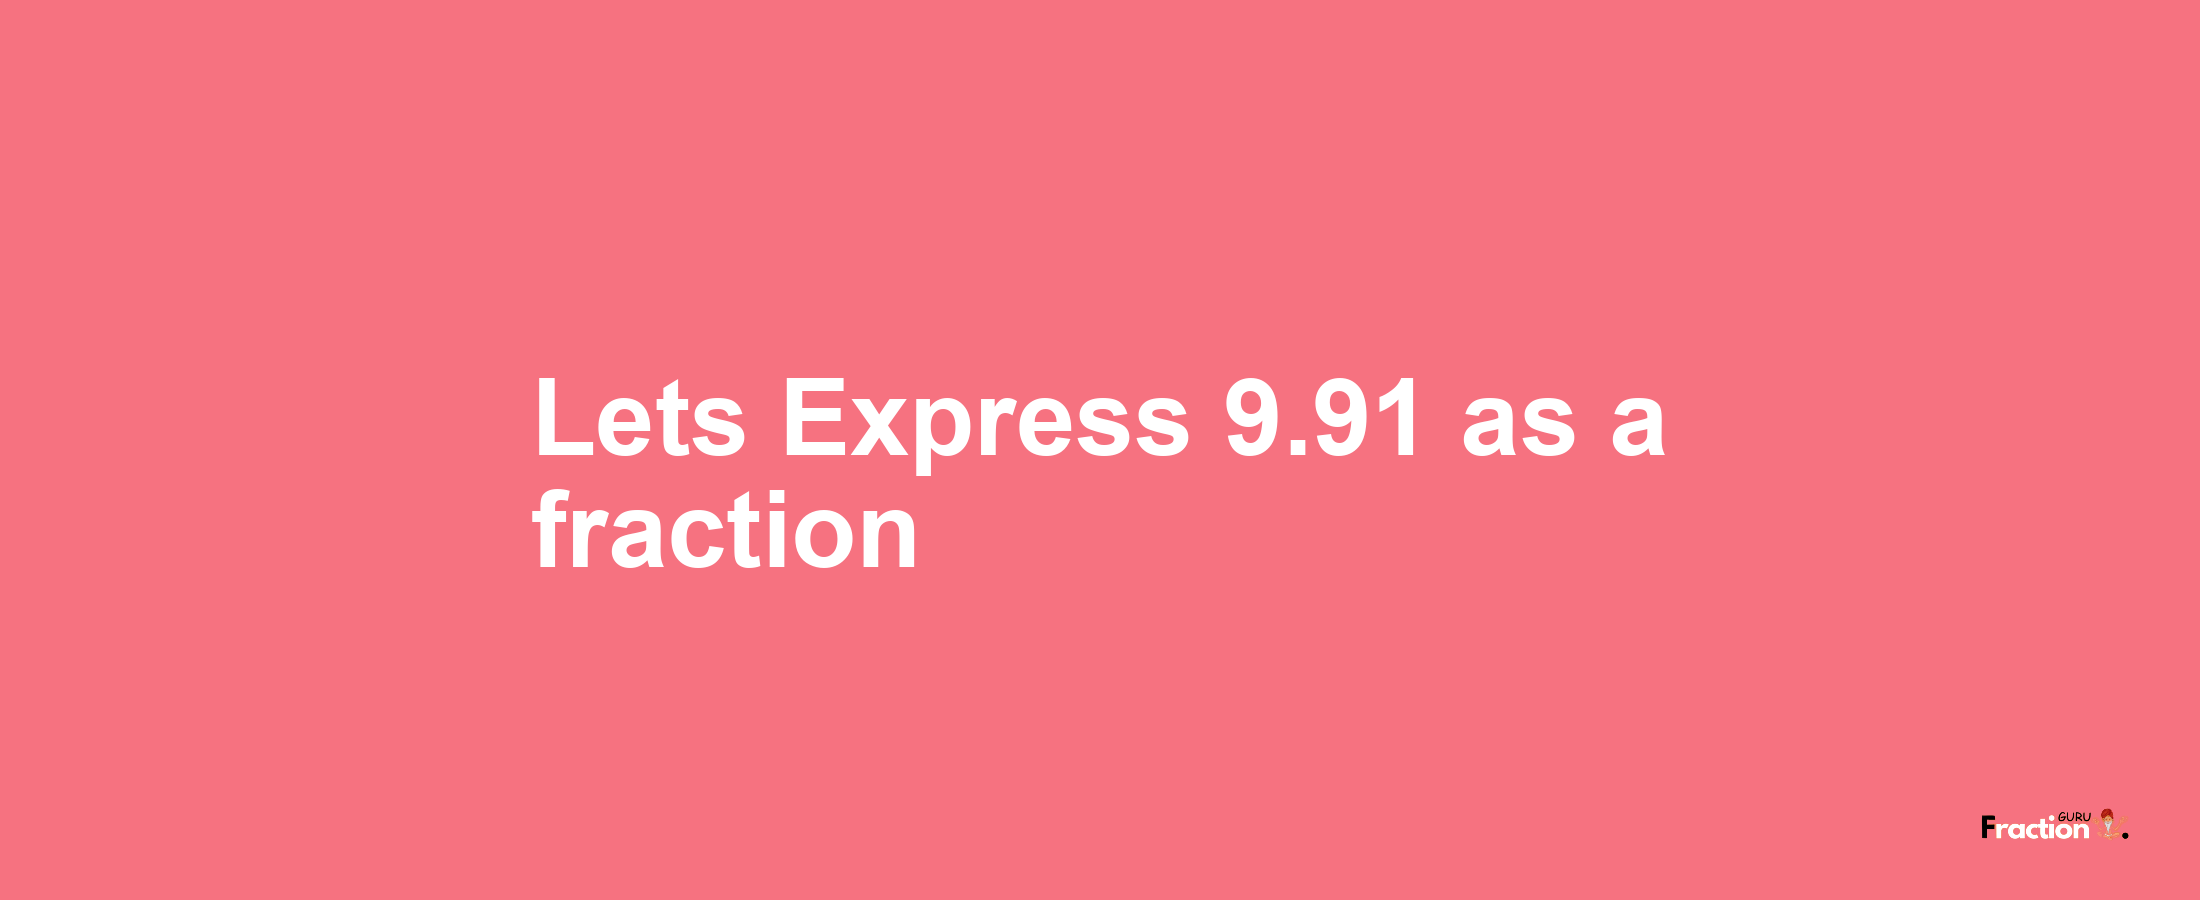 Lets Express 9.91 as afraction